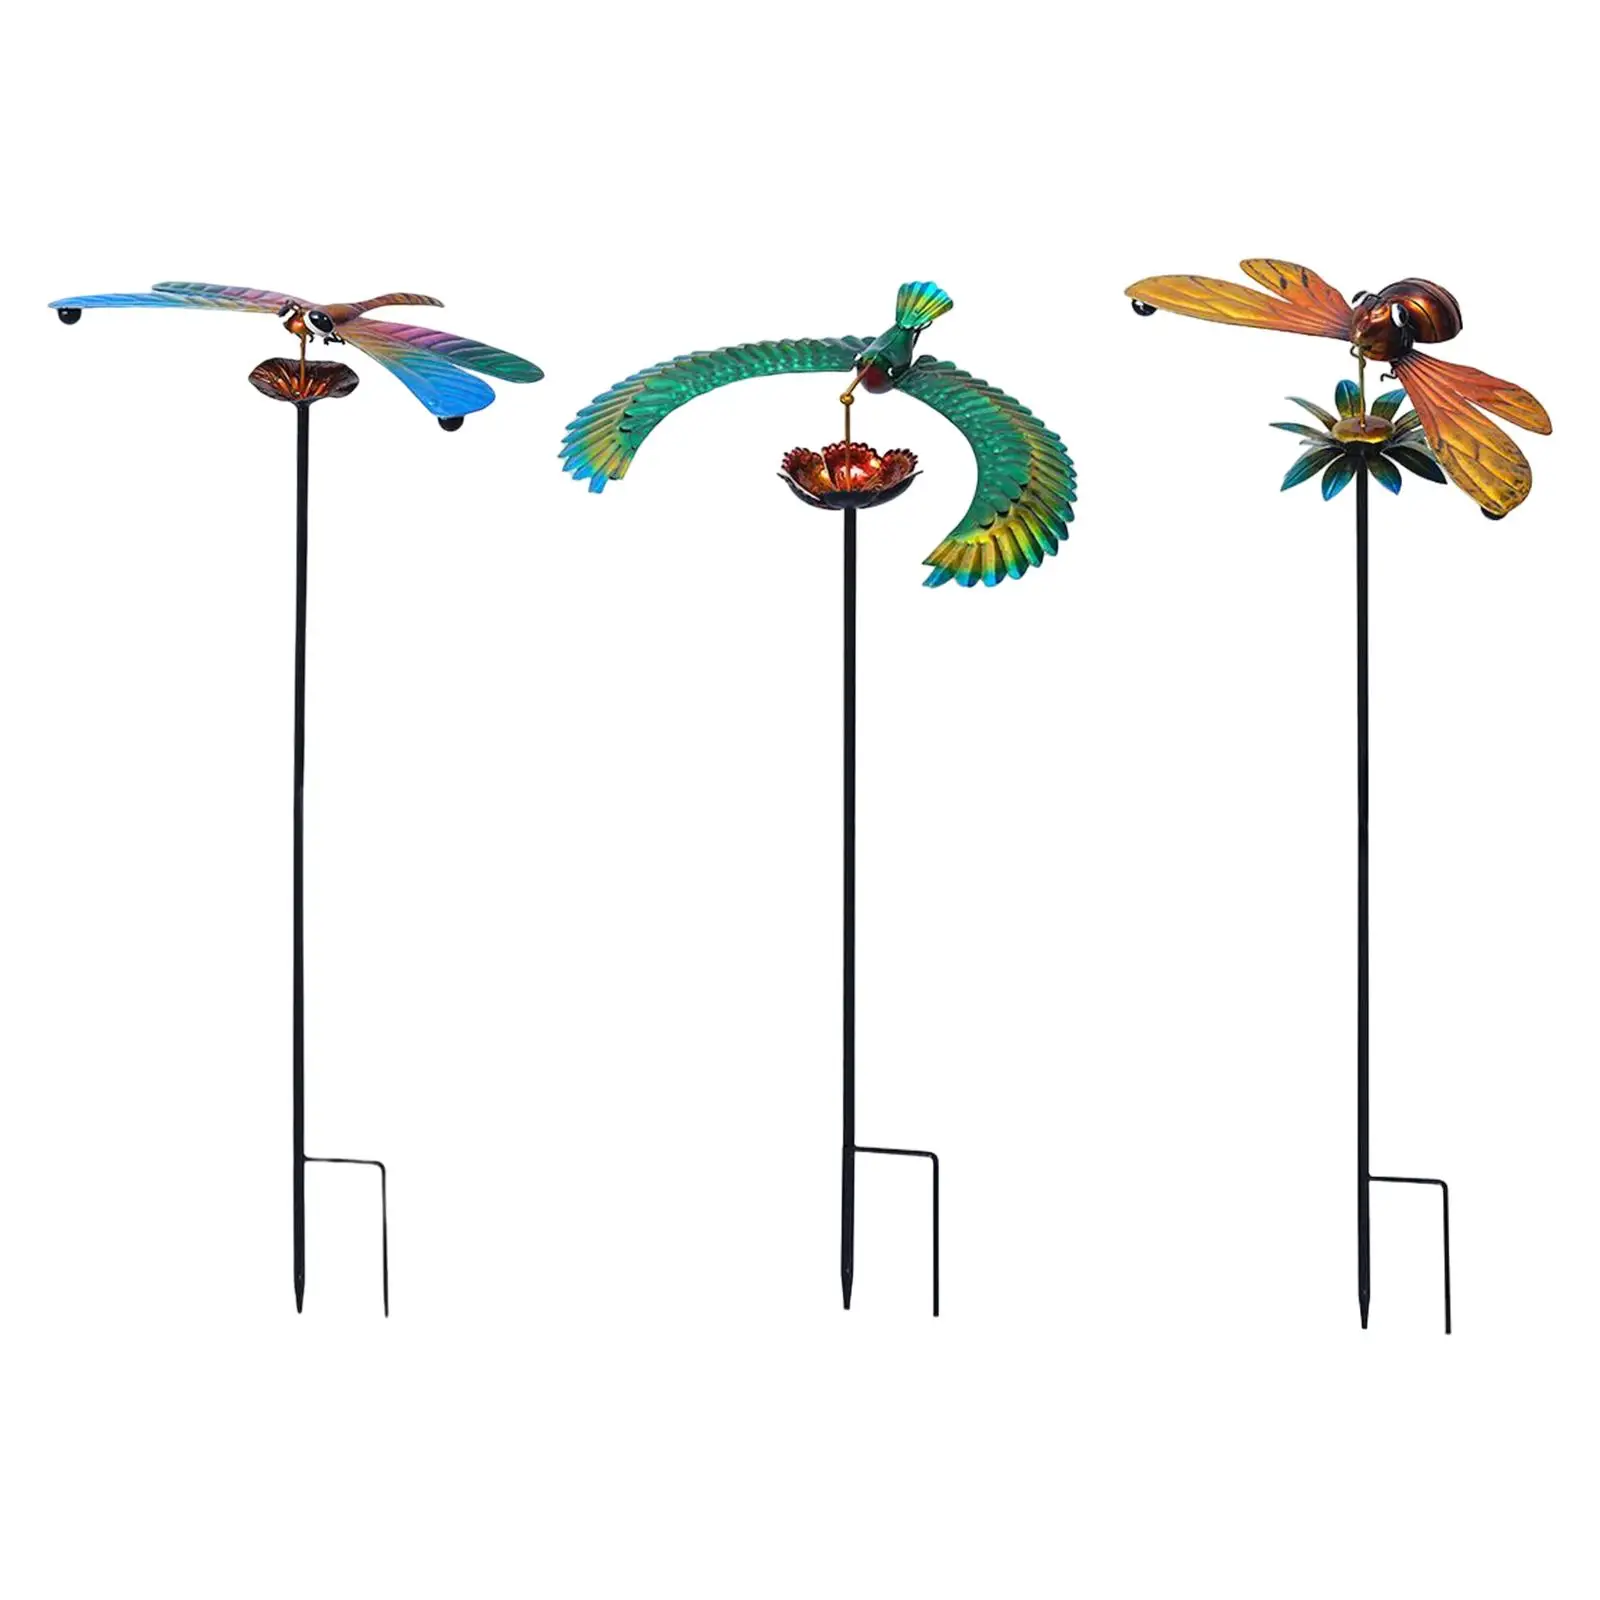 

Garden Stakes Decor Figurines Animals Statues Yard Ornament Sculpture Metal Decoration for Lawn Pathway Outdoor Patio